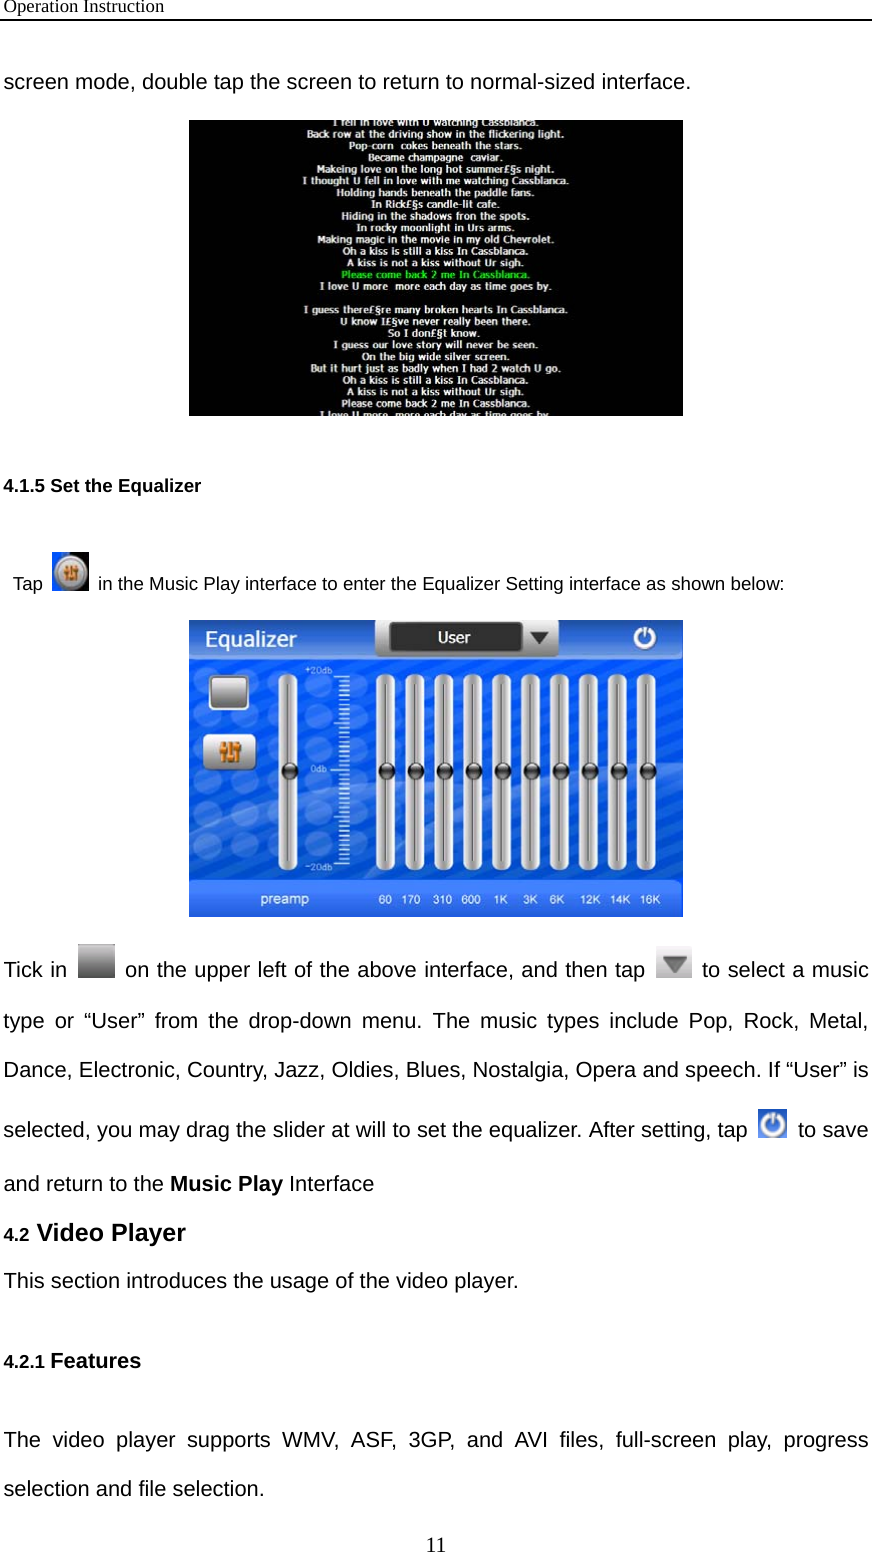 Operation Instruction 11 screen mode, double tap the screen to return to normal-sized interface.  4.1.5 Set the Equalizer   Tap    in the Music Play interface to enter the Equalizer Setting interface as shown below:    Tick in    on the upper left of the above interface, and then tap    to select a music type or “User” from the drop-down menu. The music types include Pop, Rock, Metal, Dance, Electronic, Country, Jazz, Oldies, Blues, Nostalgia, Opera and speech. If “User” is selected, you may drag the slider at will to set the equalizer. After setting, tap   to save and return to the Music Play Interface 4.2 Video Player This section introduces the usage of the video player. 4.2.1 Features The video player supports WMV, ASF, 3GP, and AVI files, full-screen play, progress selection and file selection. 